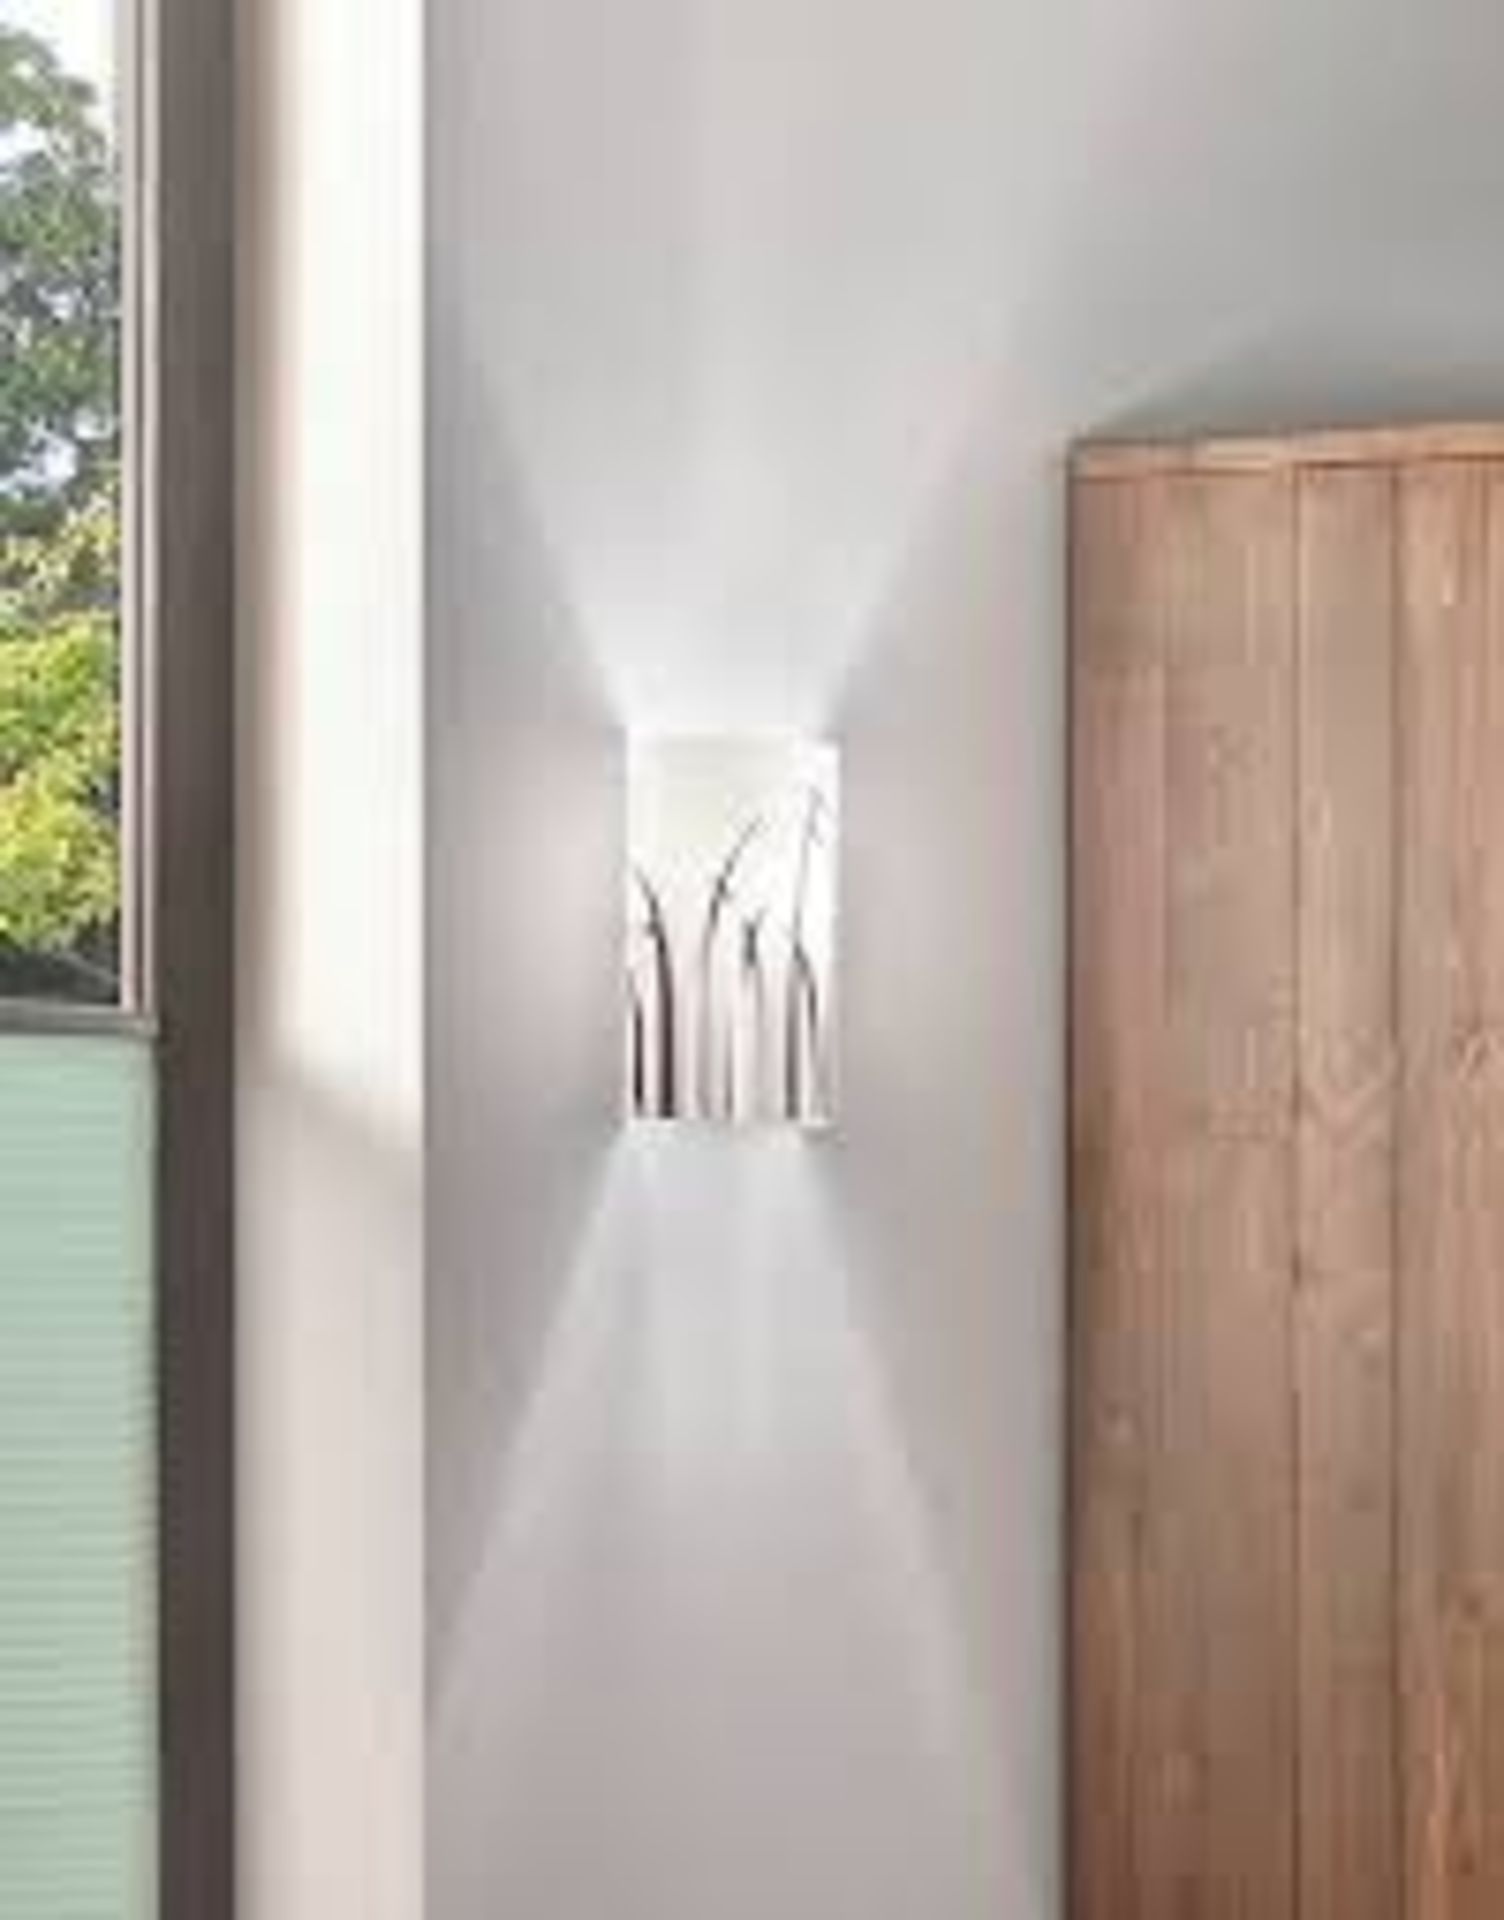 EGLO Rivato White And Chrome Glass And Metal Curved Wall Light - R13a.10.